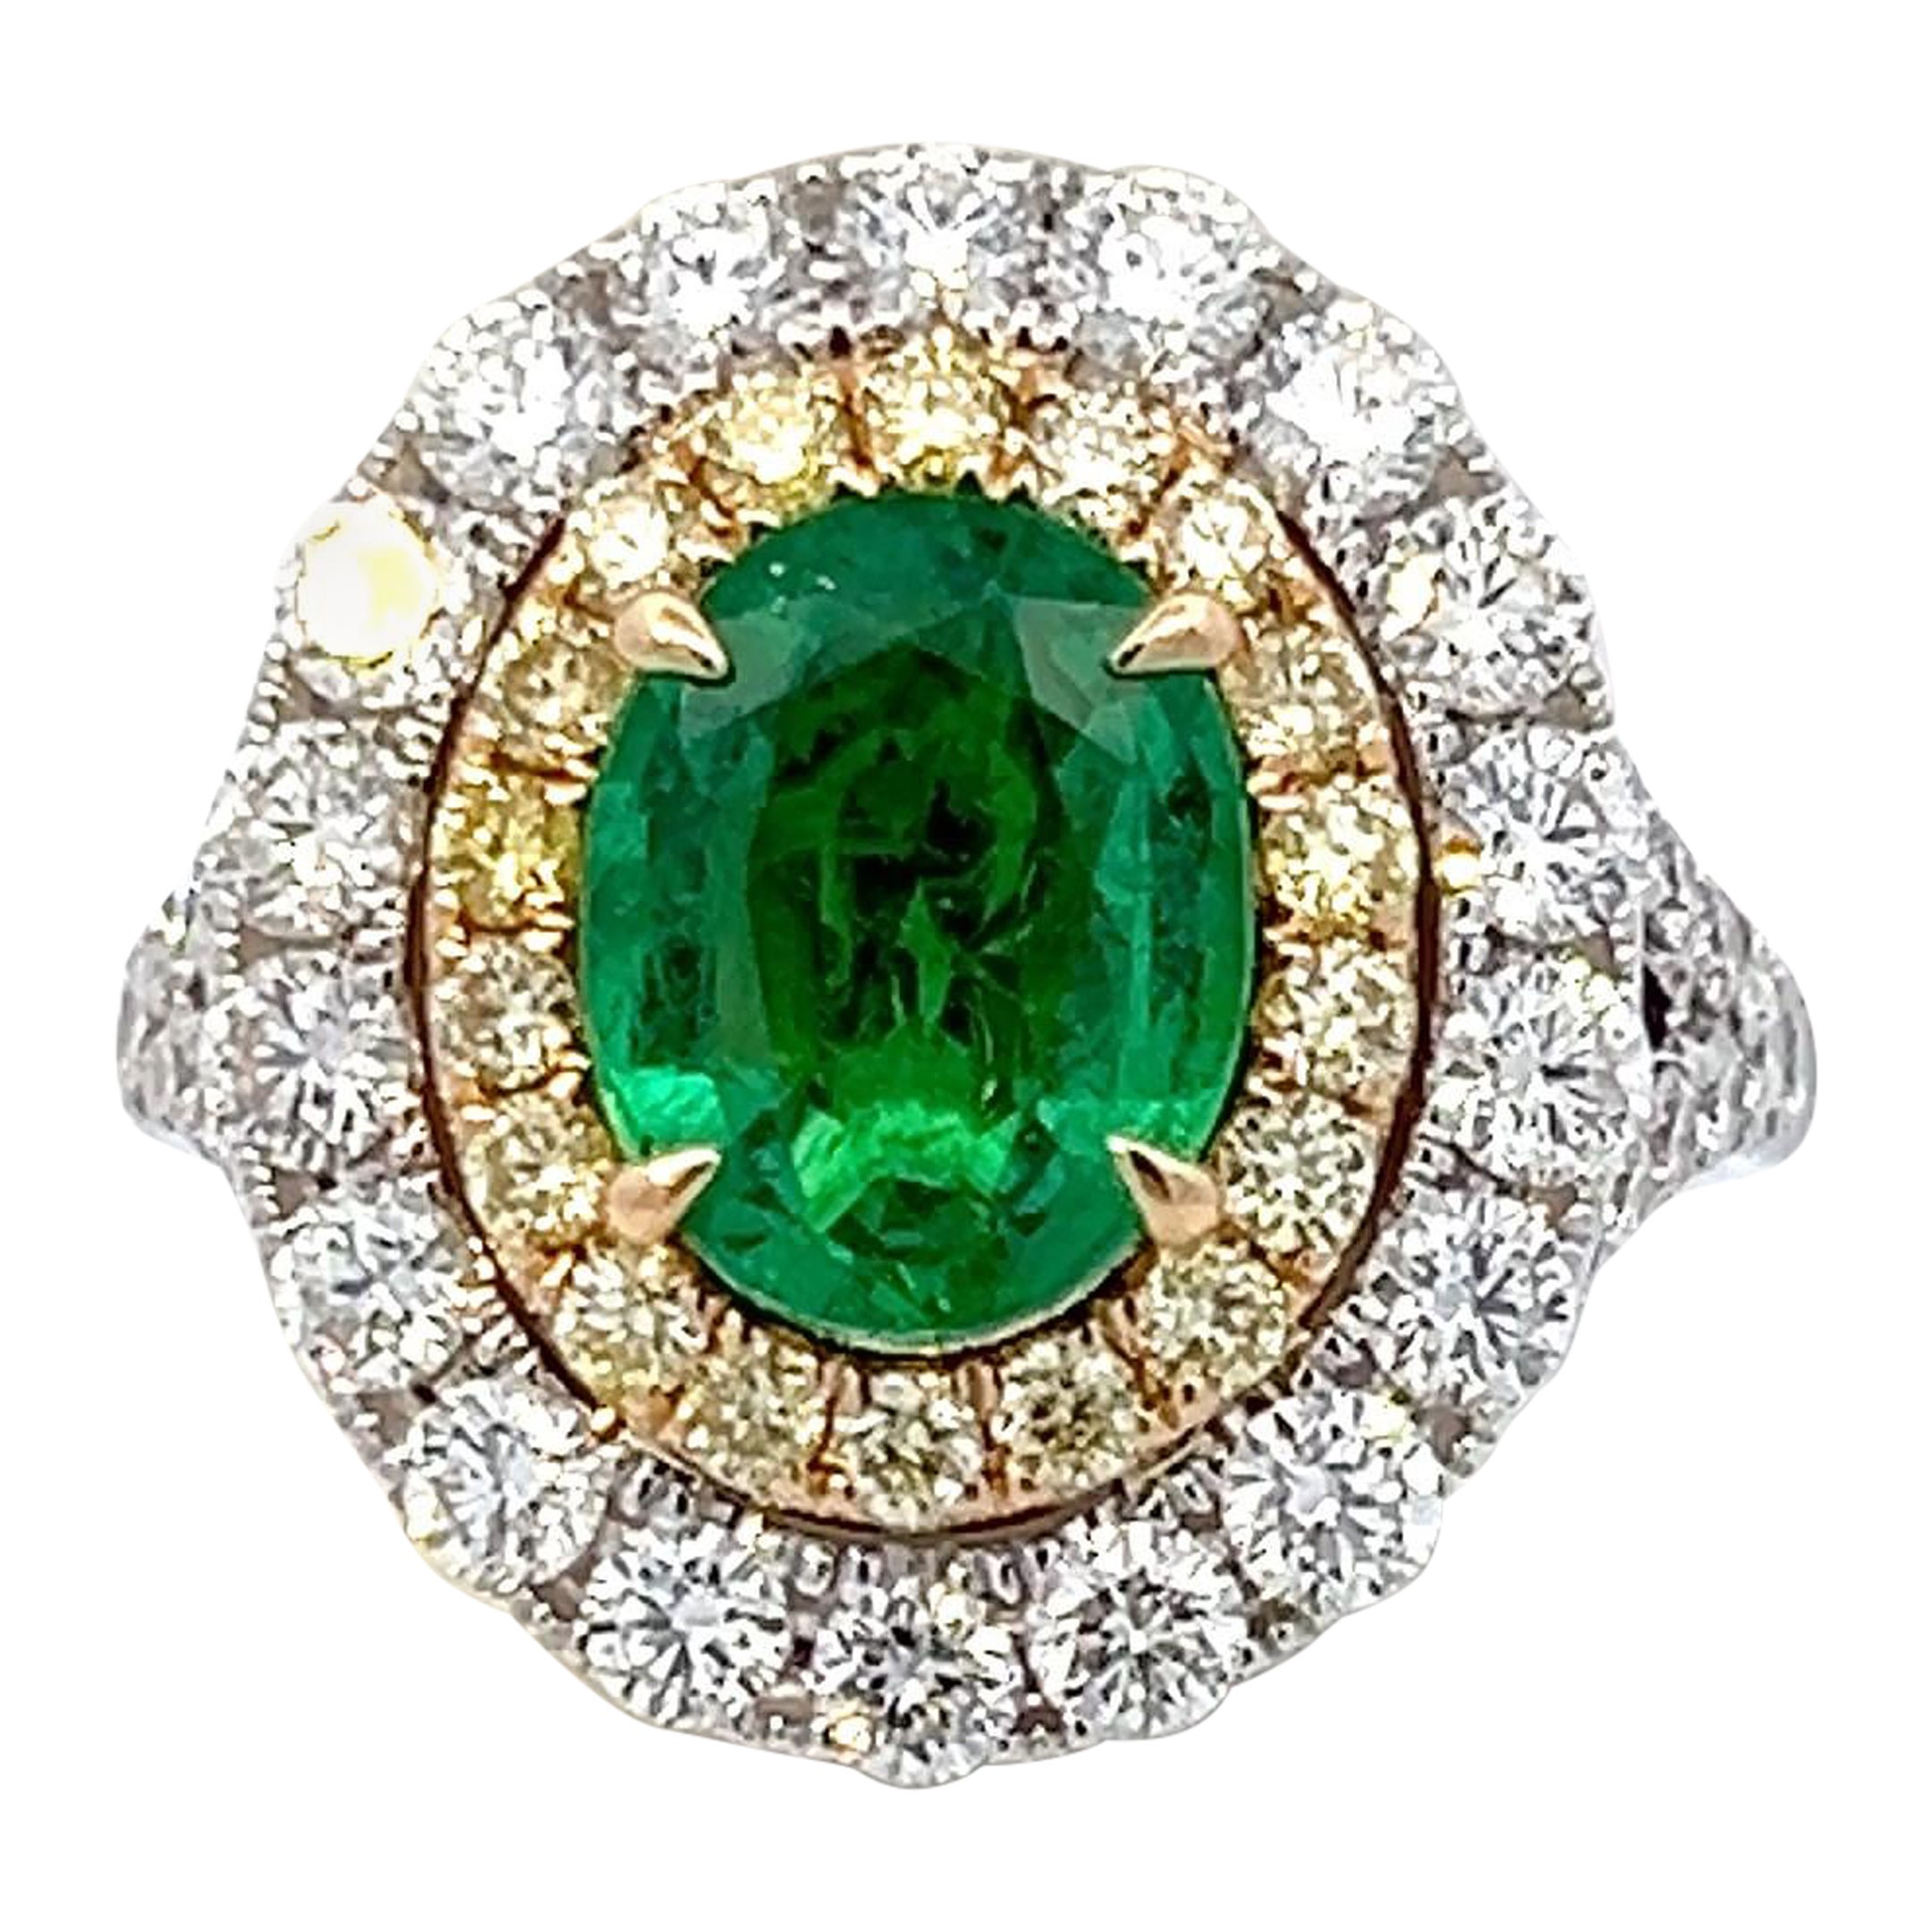 1.98 carat Emerald and Diamond ring in 18K Gold